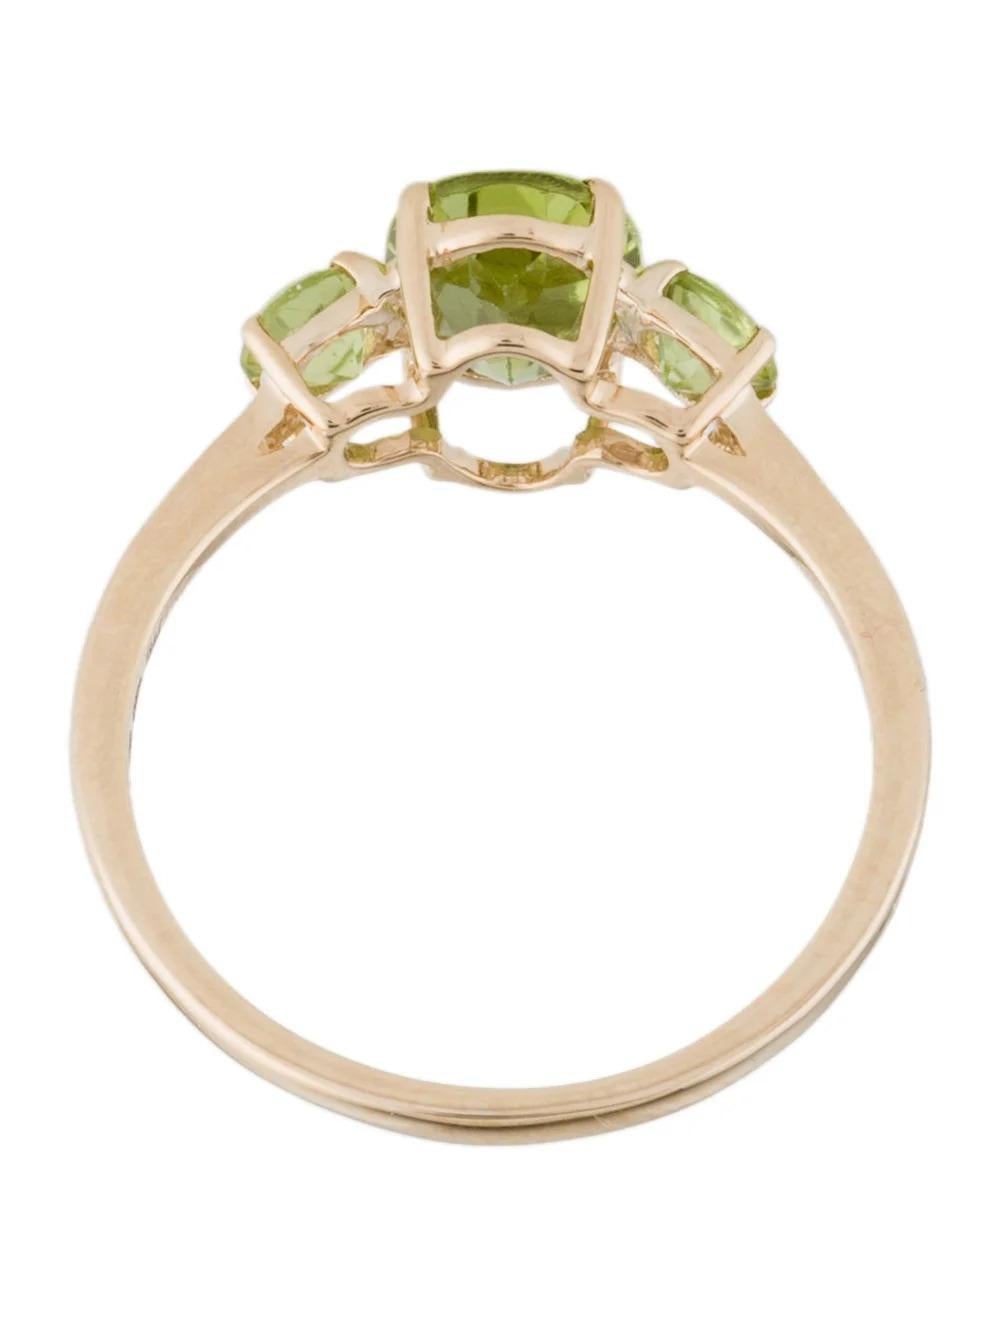 Women's 14K Yellow Gold Peridot Cocktail Ring, Size 7: Vibrant Green Gemstone Jewelry For Sale